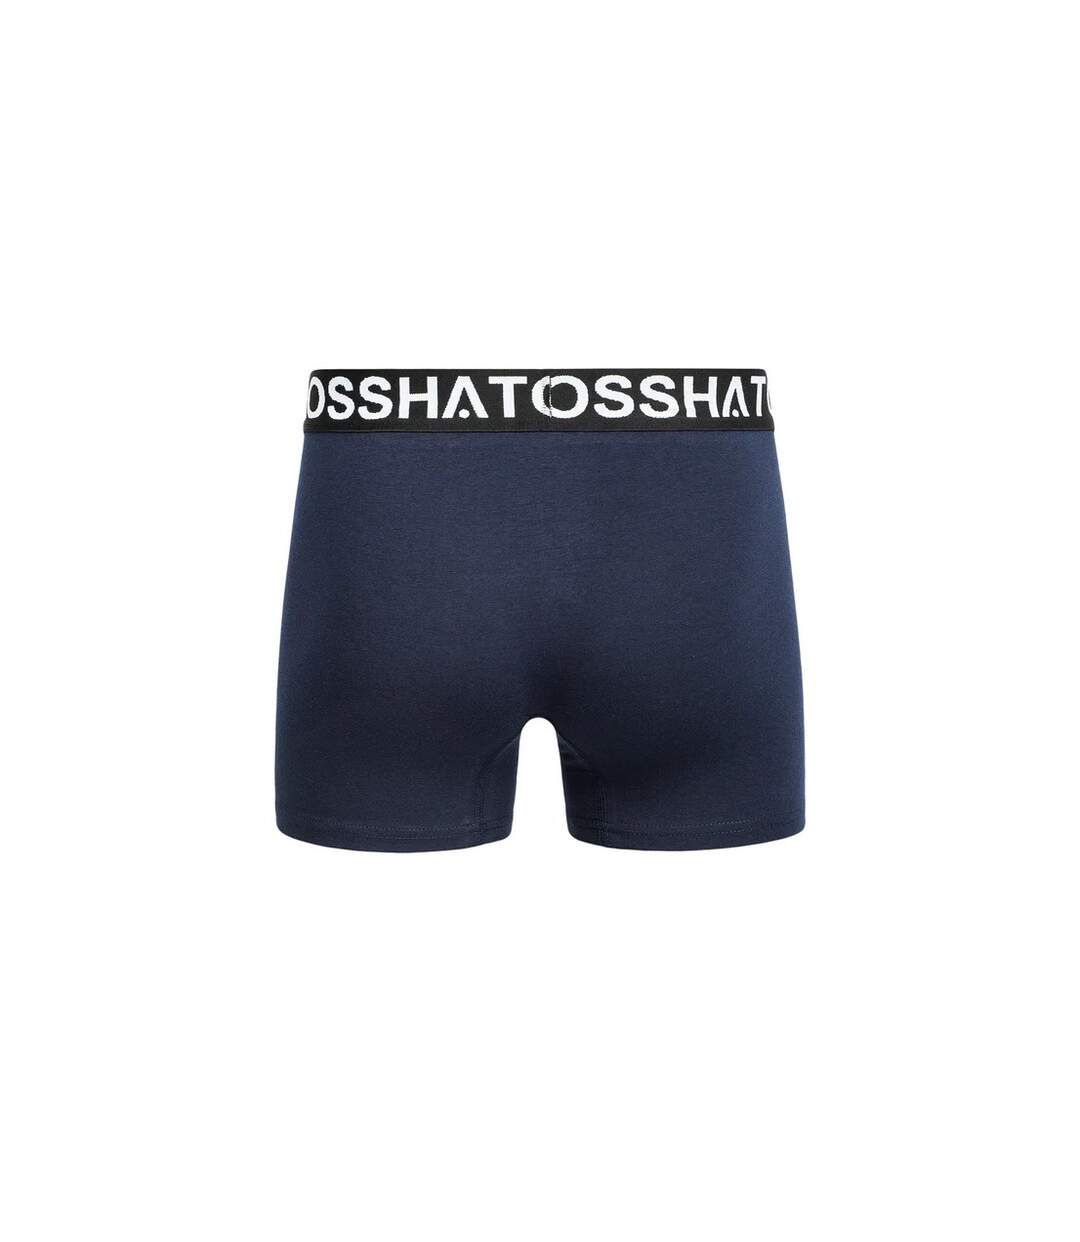 Crosshatch Mens Astral Boxer Shorts (Pack of 5) (Navy)